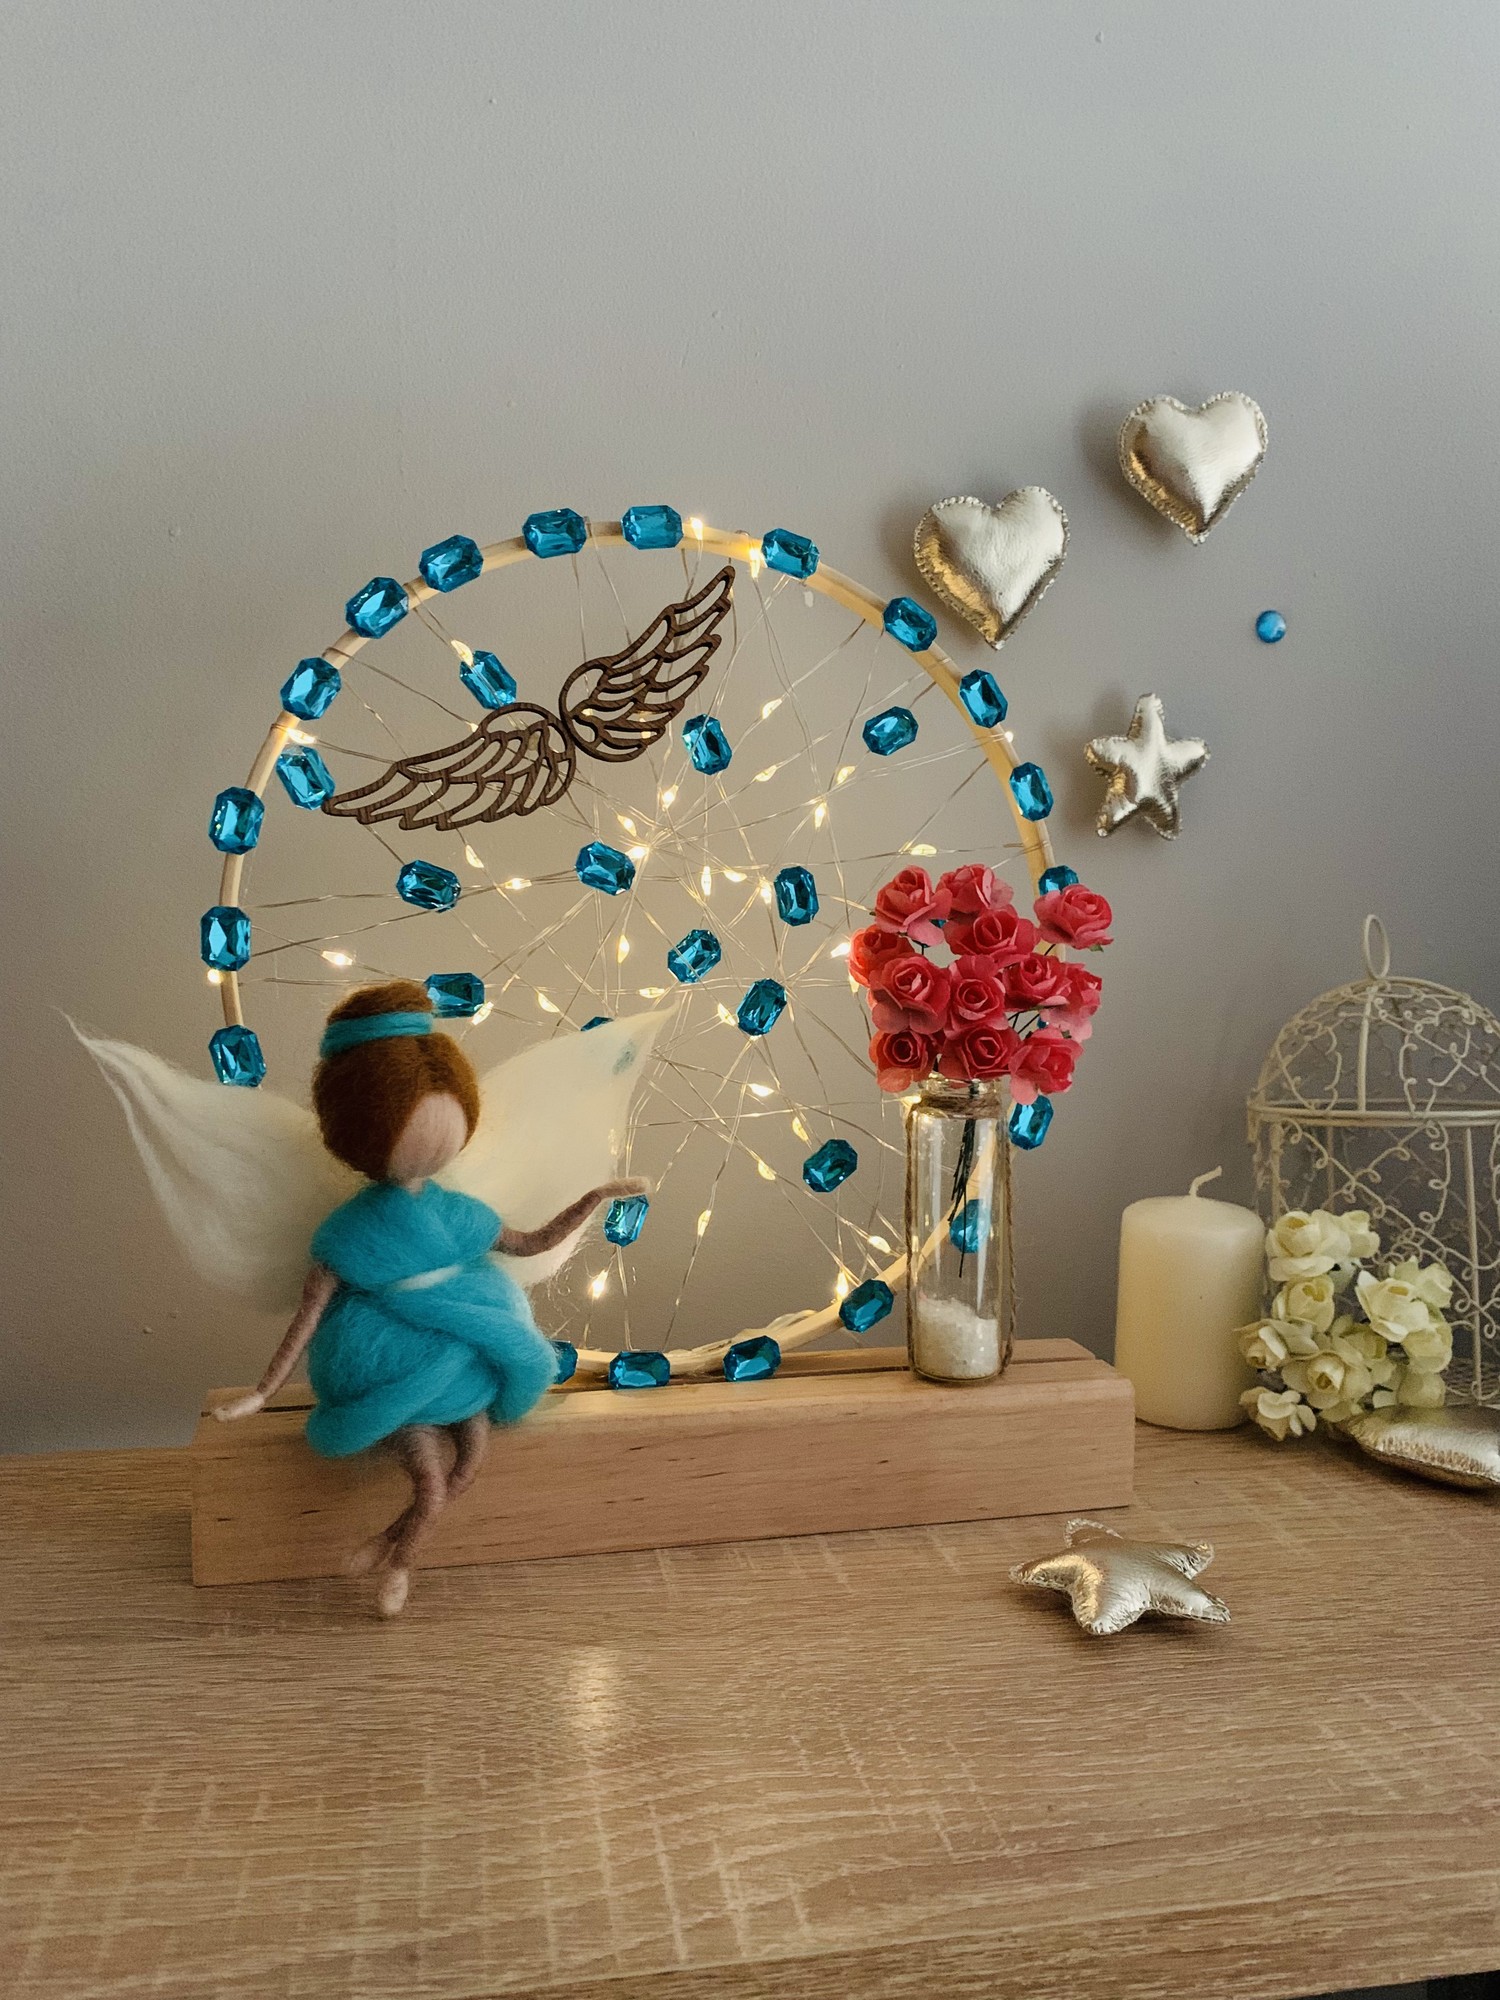 LAMP WITH BLUE ANGEL AND PINK FLOWERS, ROOM DECORATION, HOUSE LIGHTING